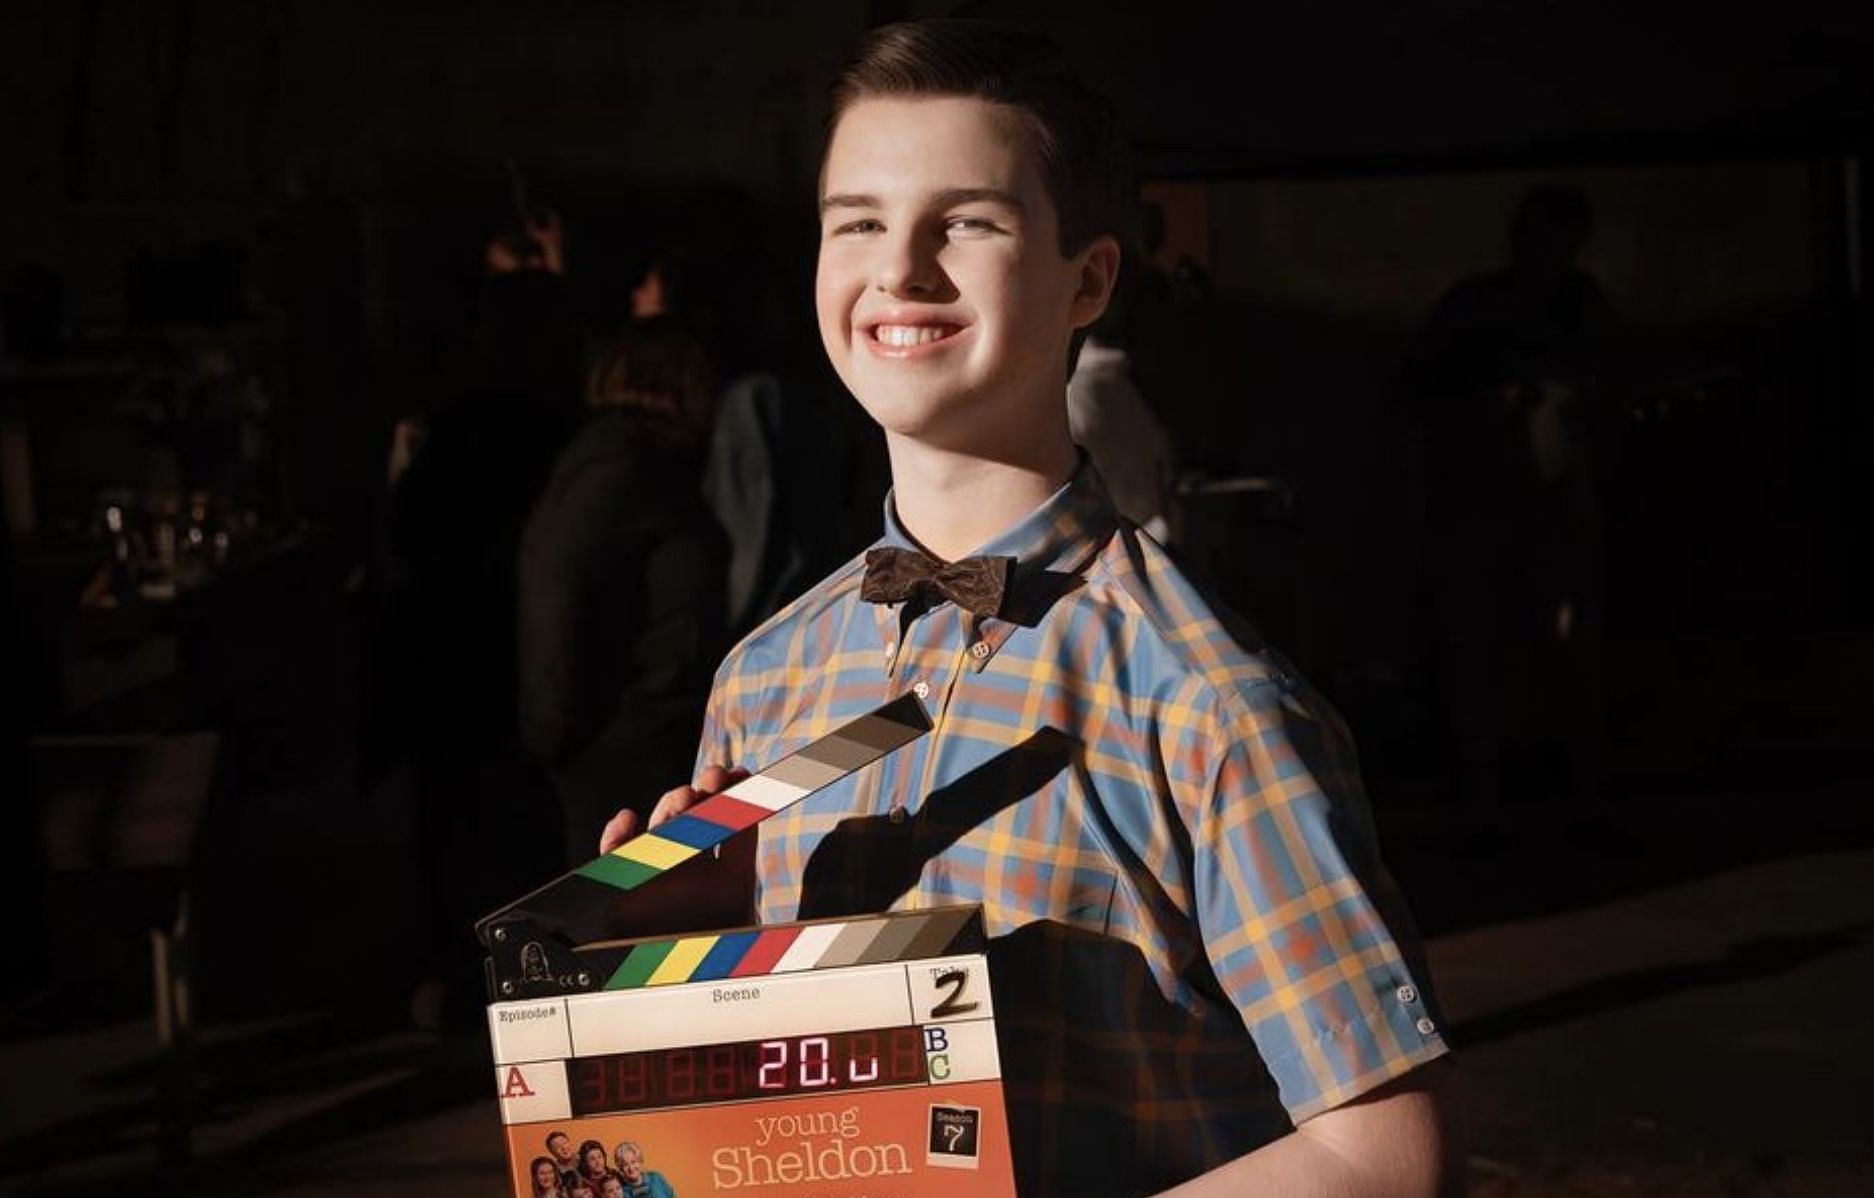 A still of Young Sheldon. (Image via Instagram/@youngsheldoncbs)